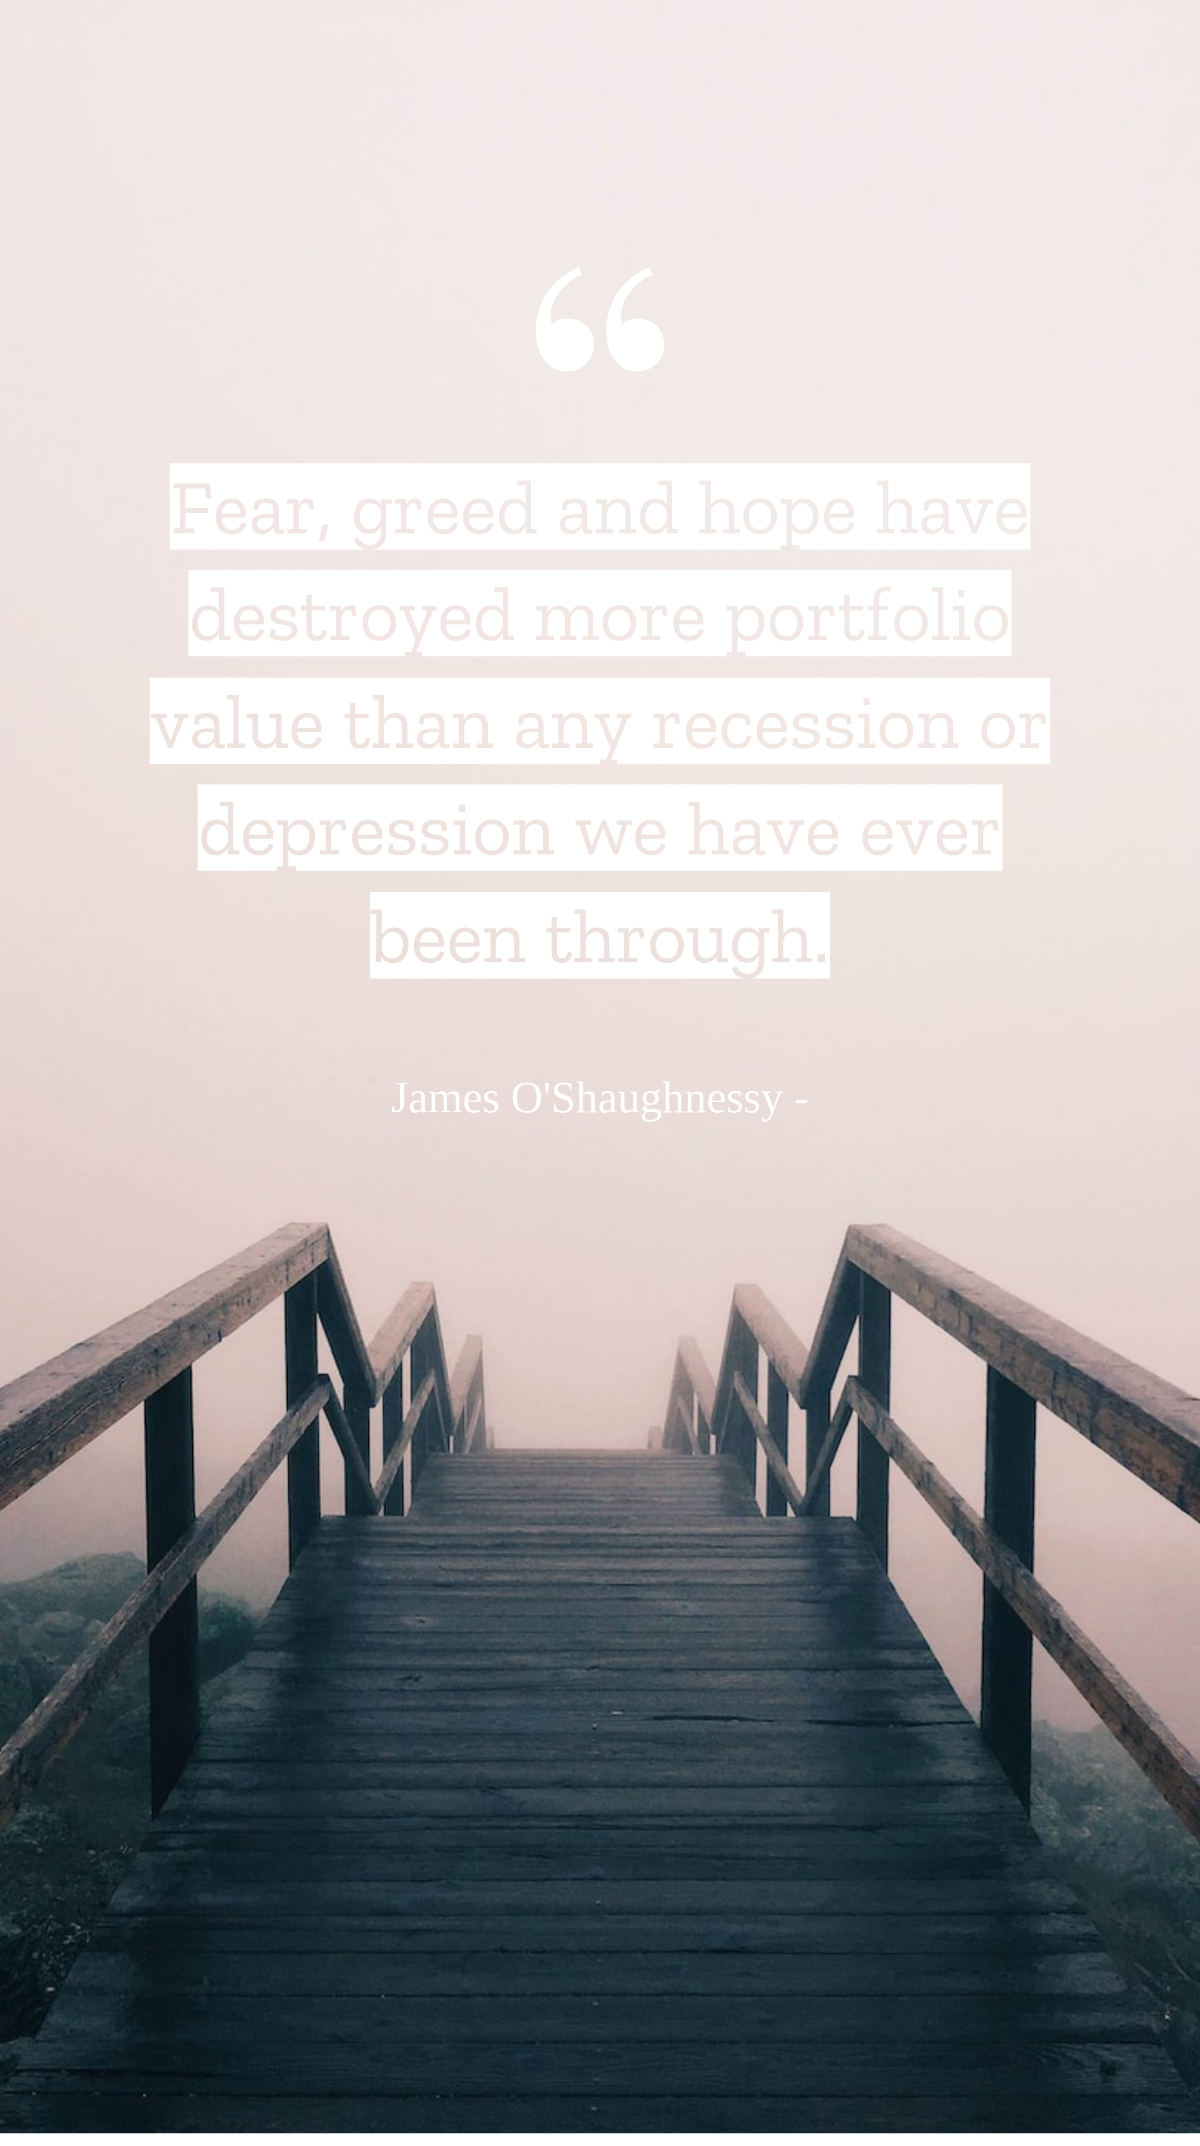 James O'Shaughnessy - Fear, greed and hope have destroyed more portfolio value than any recession or depression we have ever been through. Template